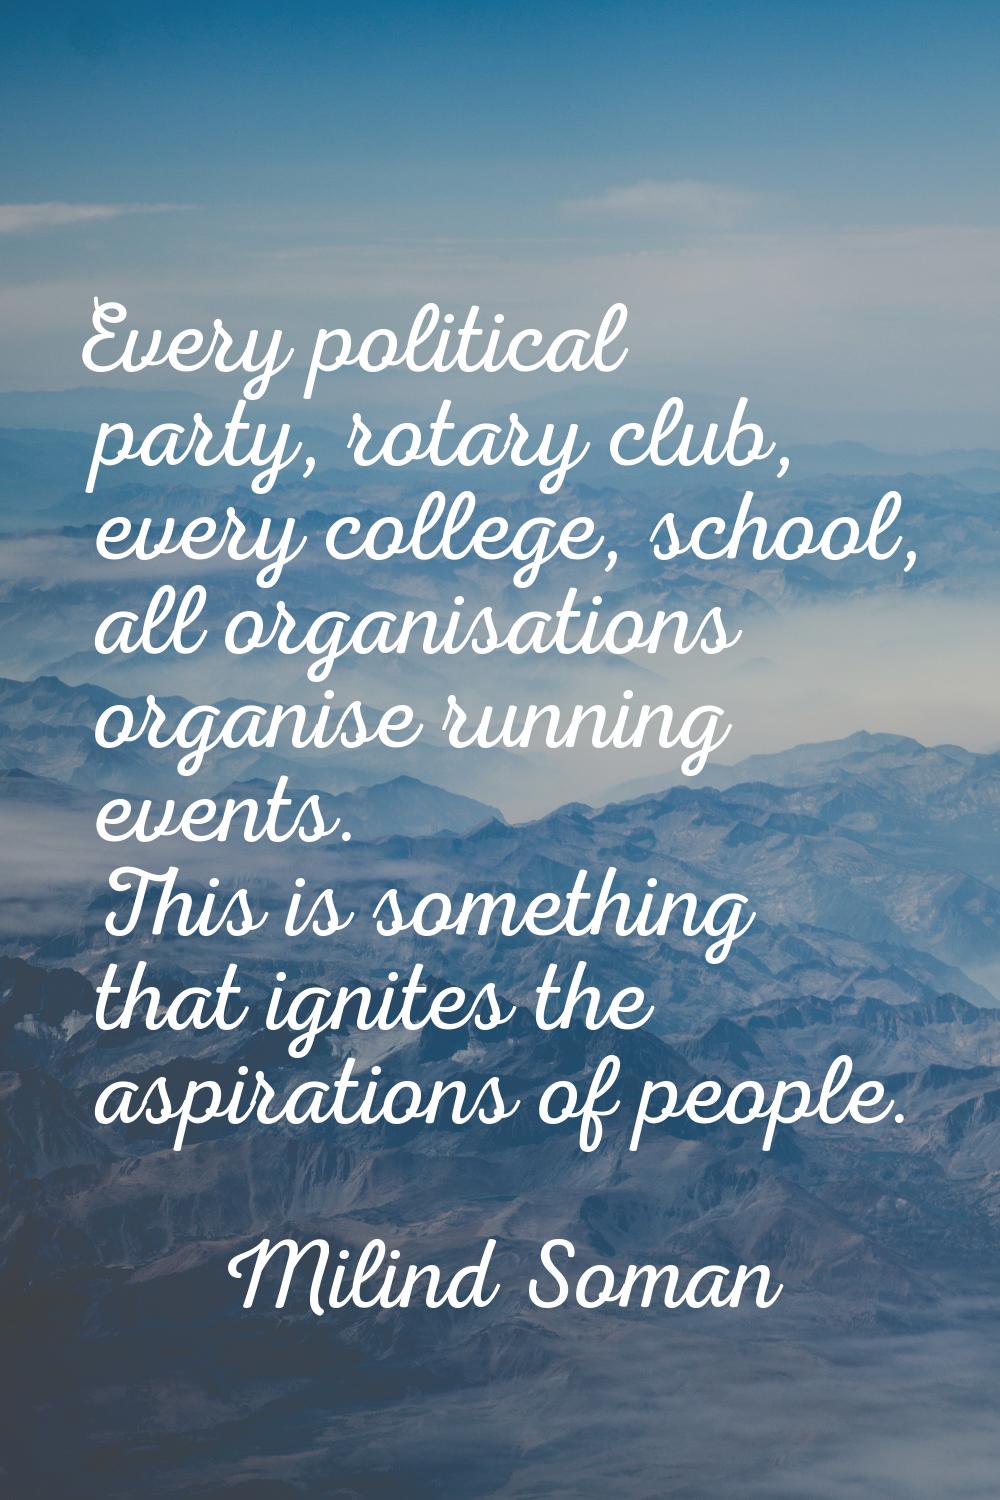 Every political party, rotary club, every college, school, all organisations organise running event